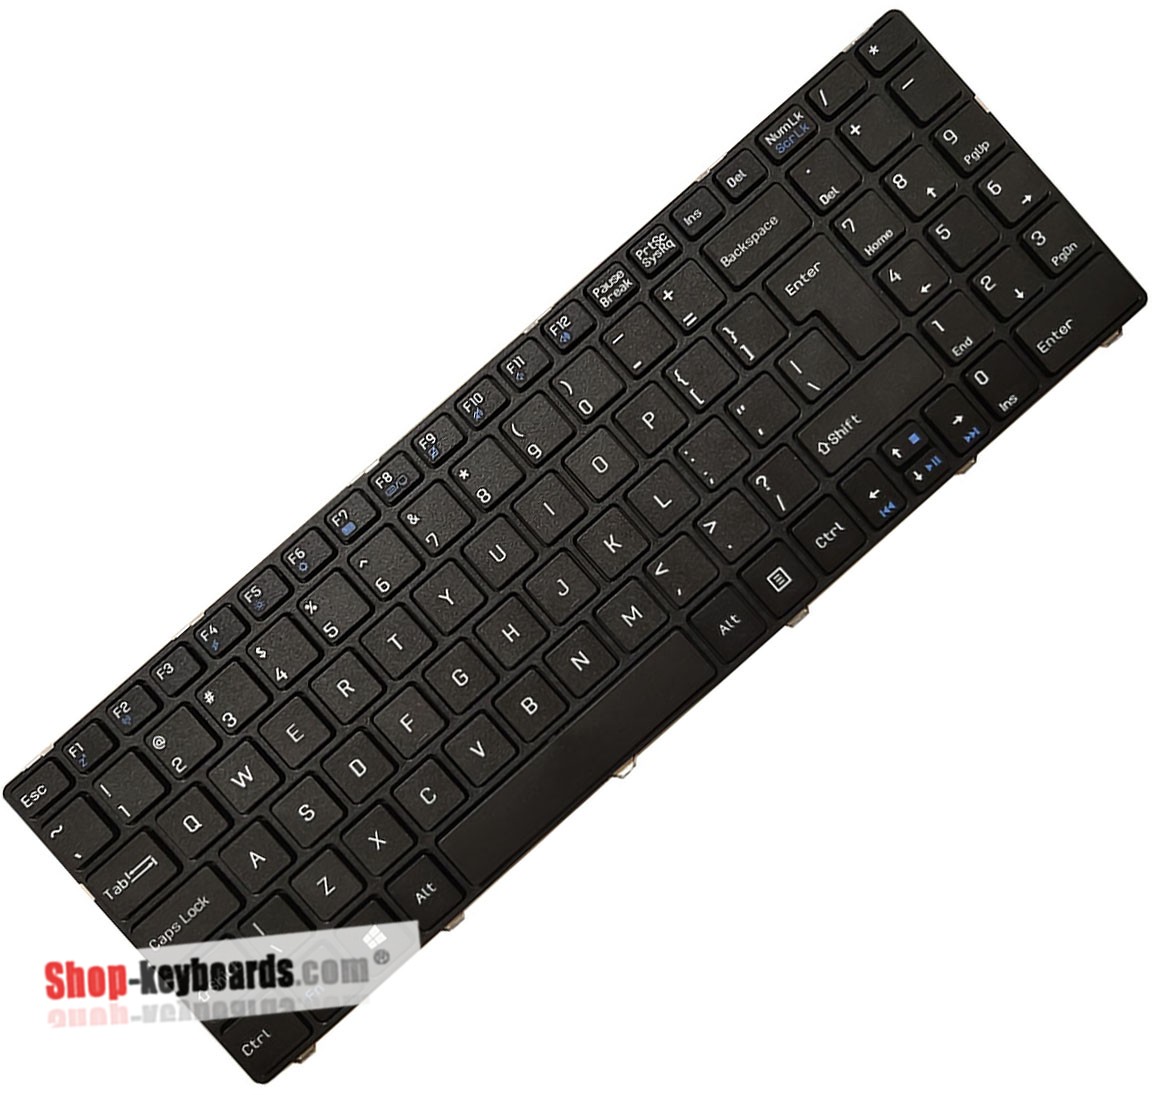 Medion Md97787 Keyboard replacement